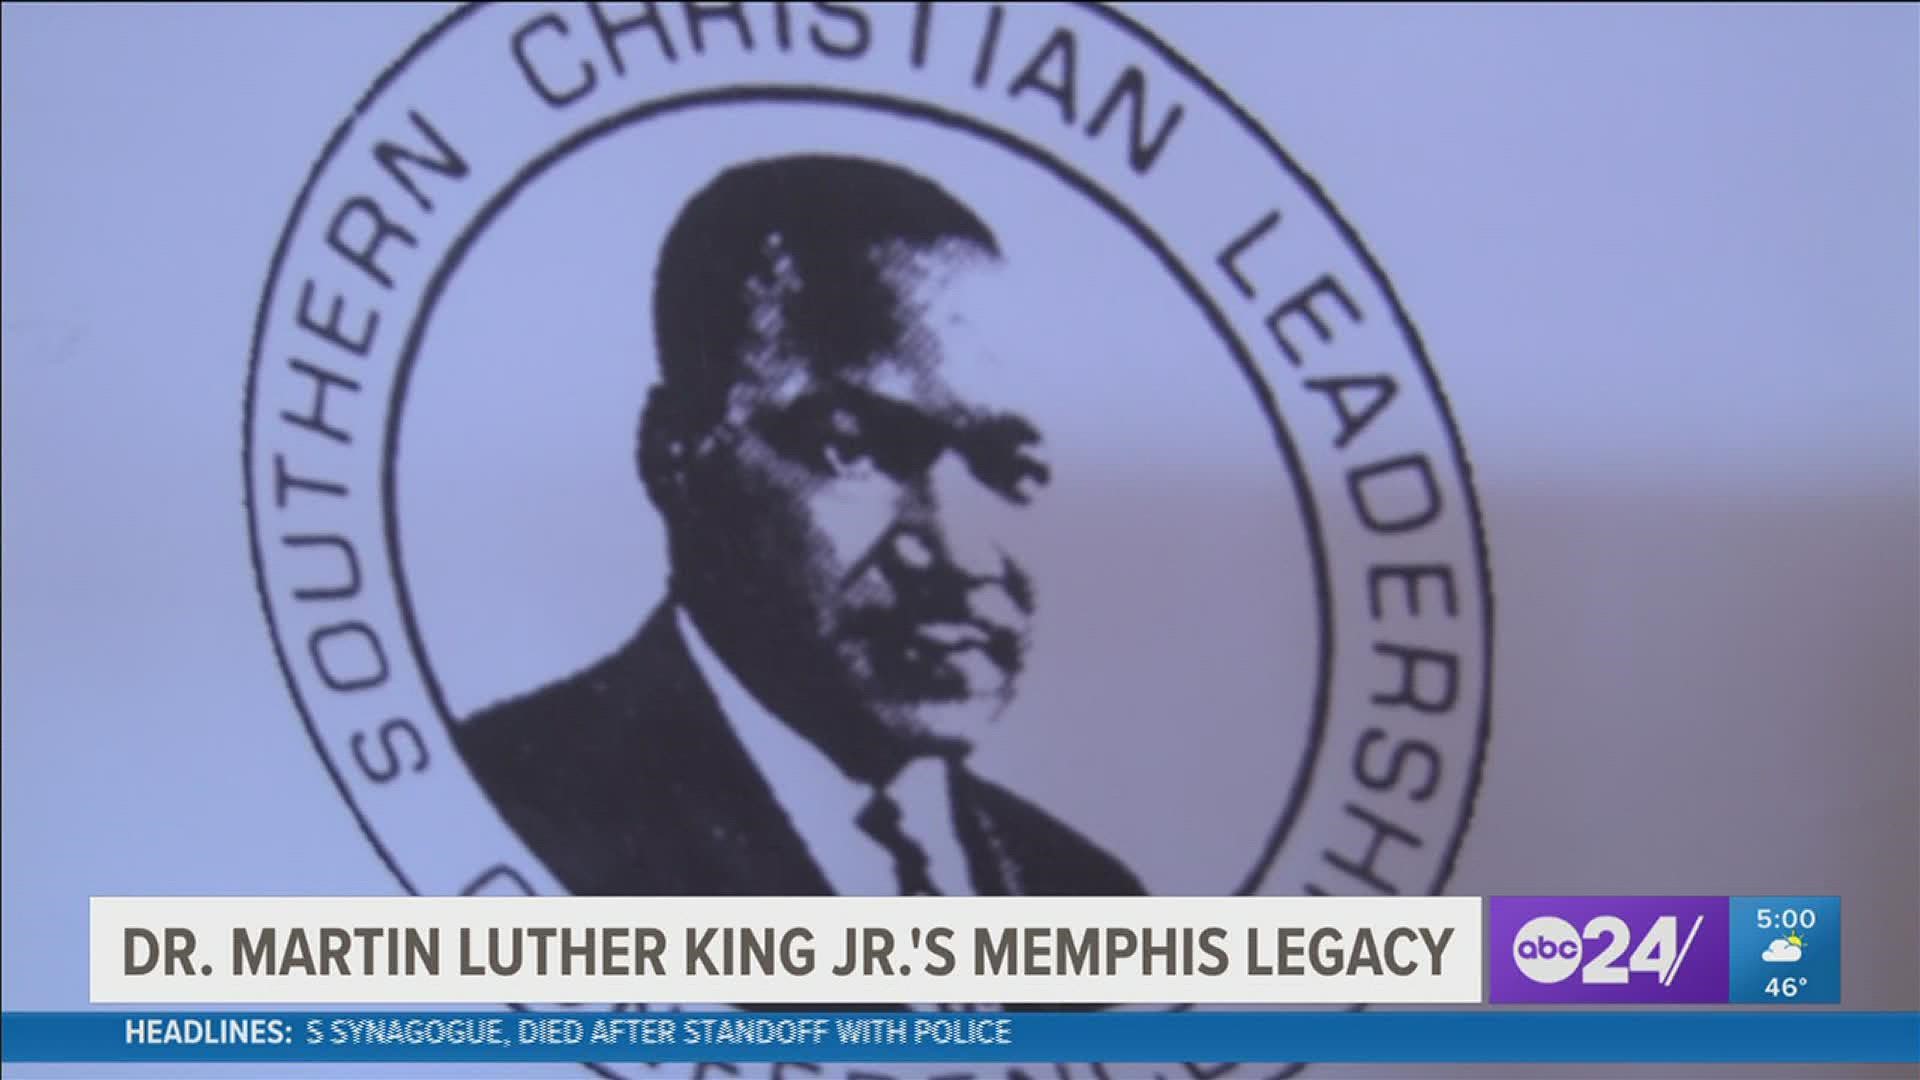 The annual gathering by SCLC in Memphis remembered Dr. King's work and sacrifice in the city in the weeks leading up to his assassination in 1968.